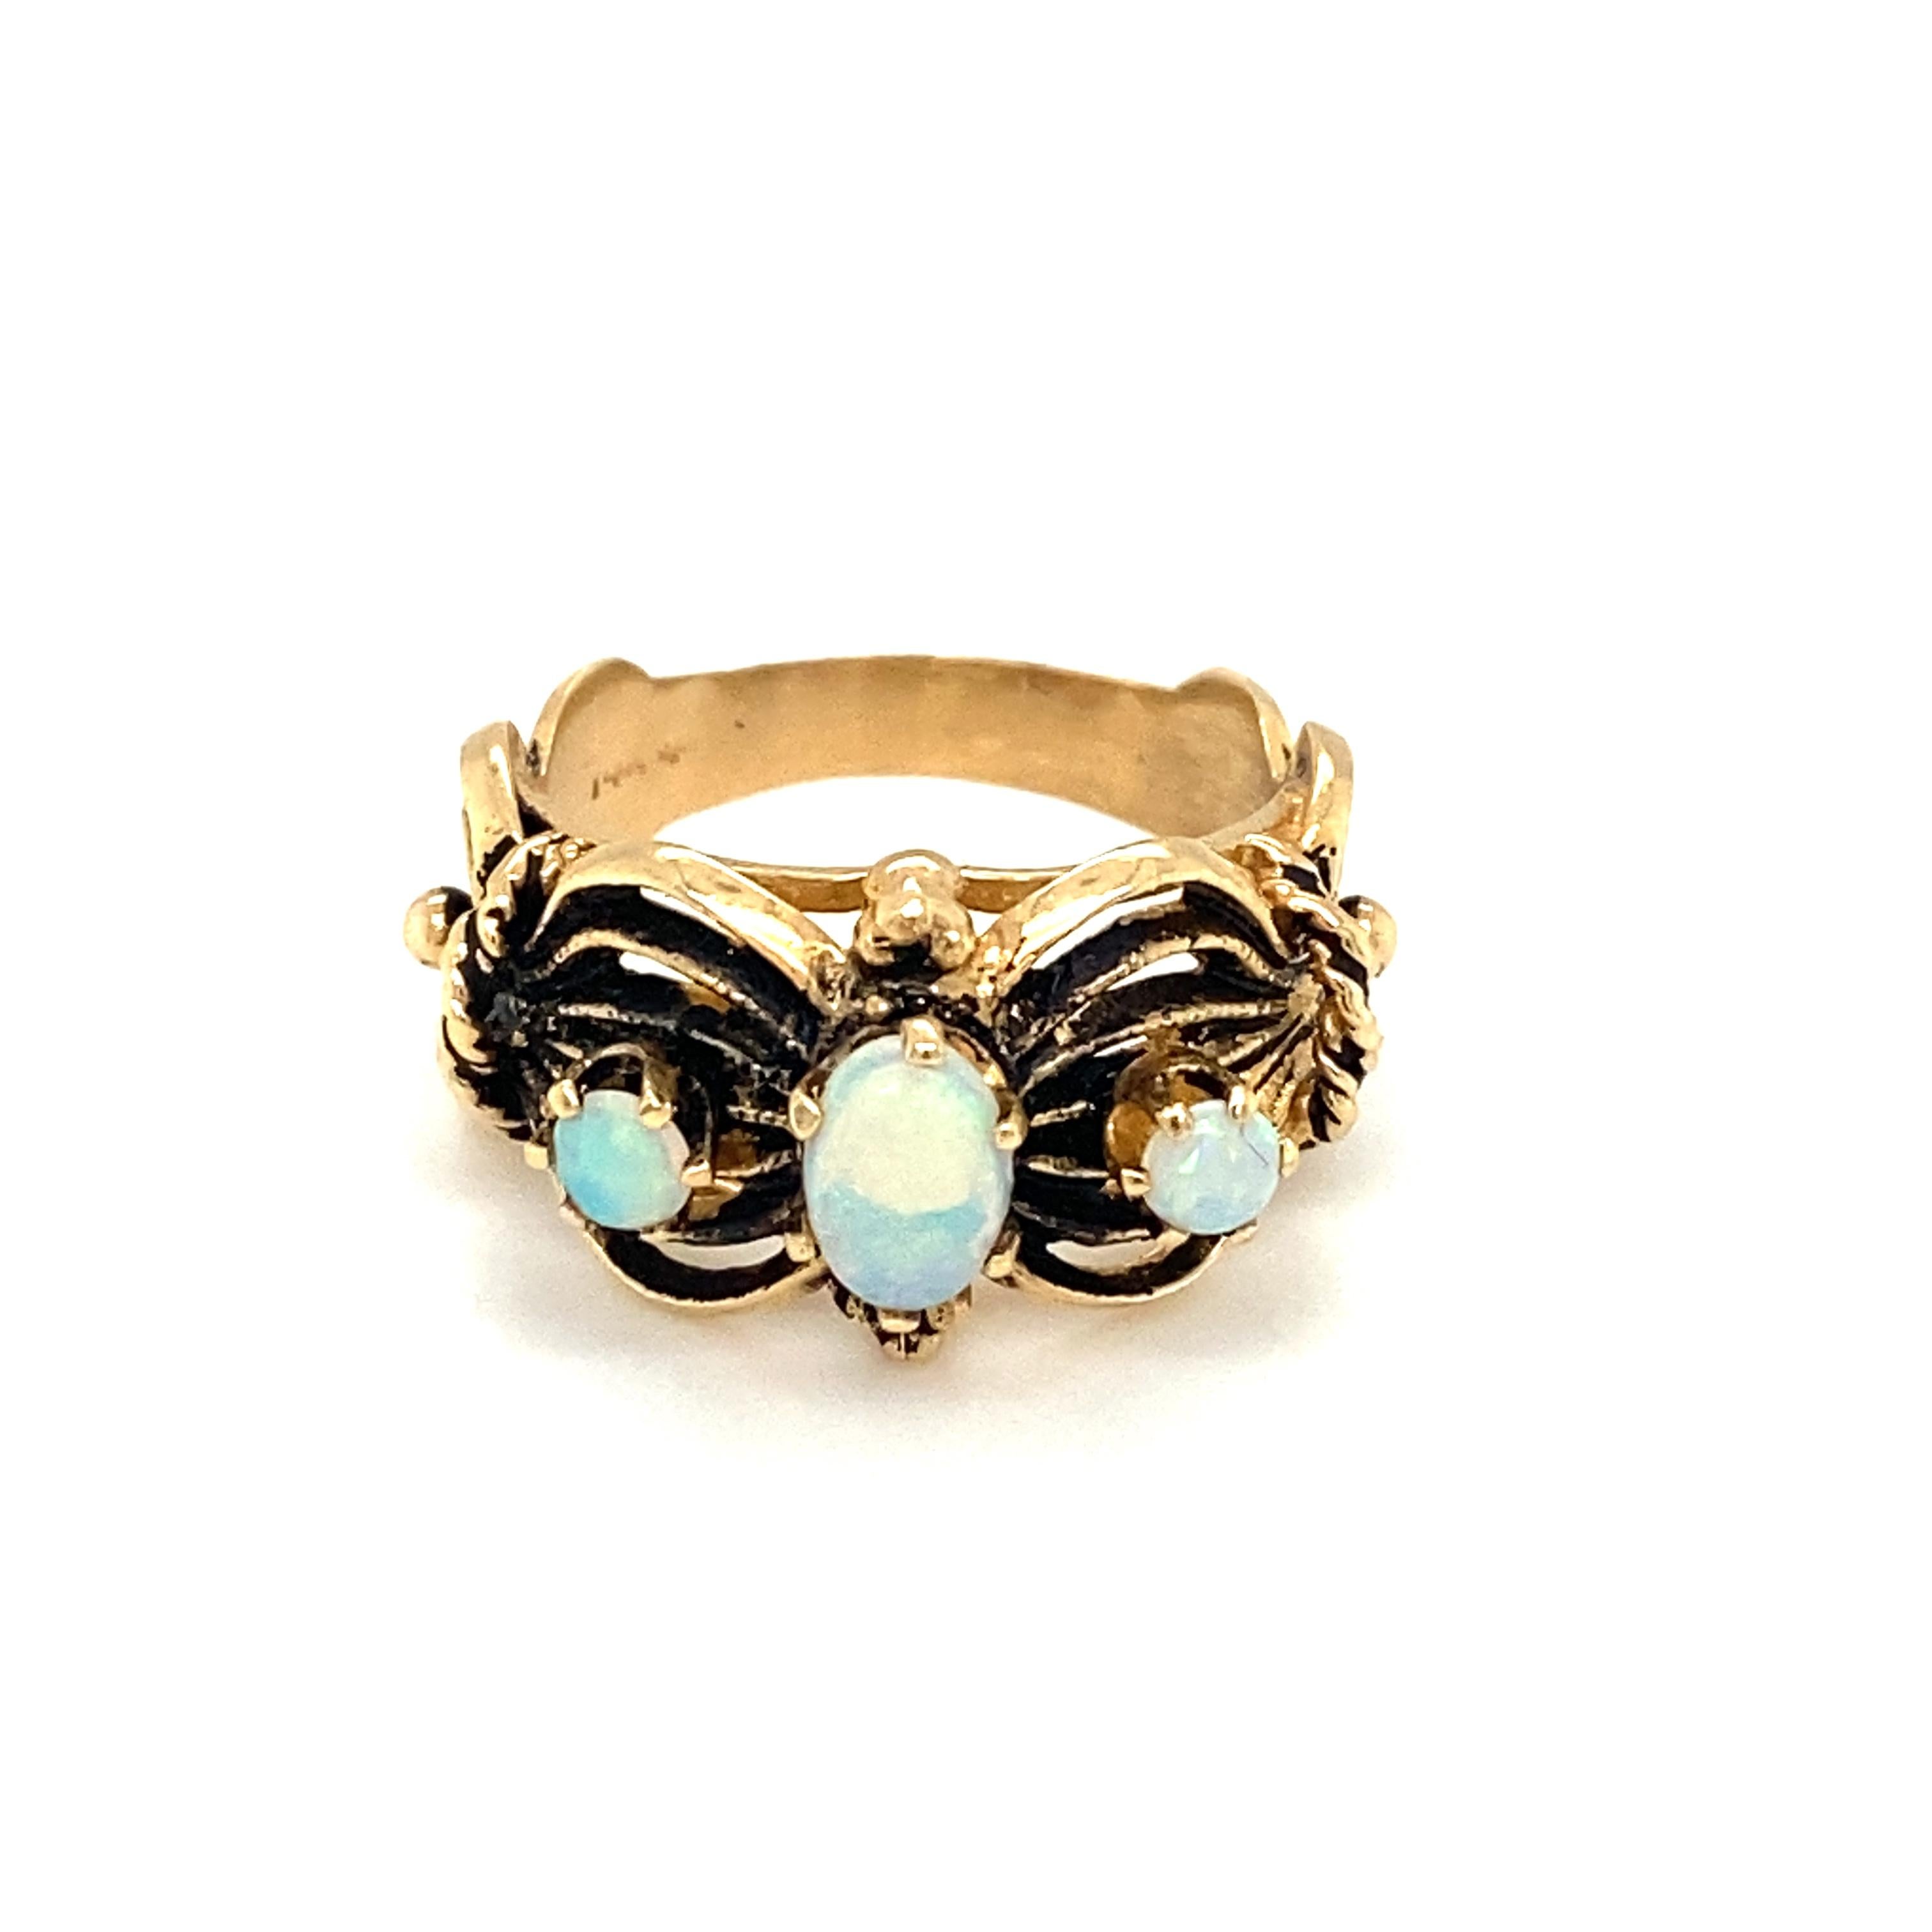 Item Details: This antique ring features three opals which originate from Australia.
The three opals have lovely color play ranging from orange to shades of green flashes.
Circa: 1915
Metal Type: 14k yellow gold 
Weight: 5.1g
Size: US 6.5

Opal